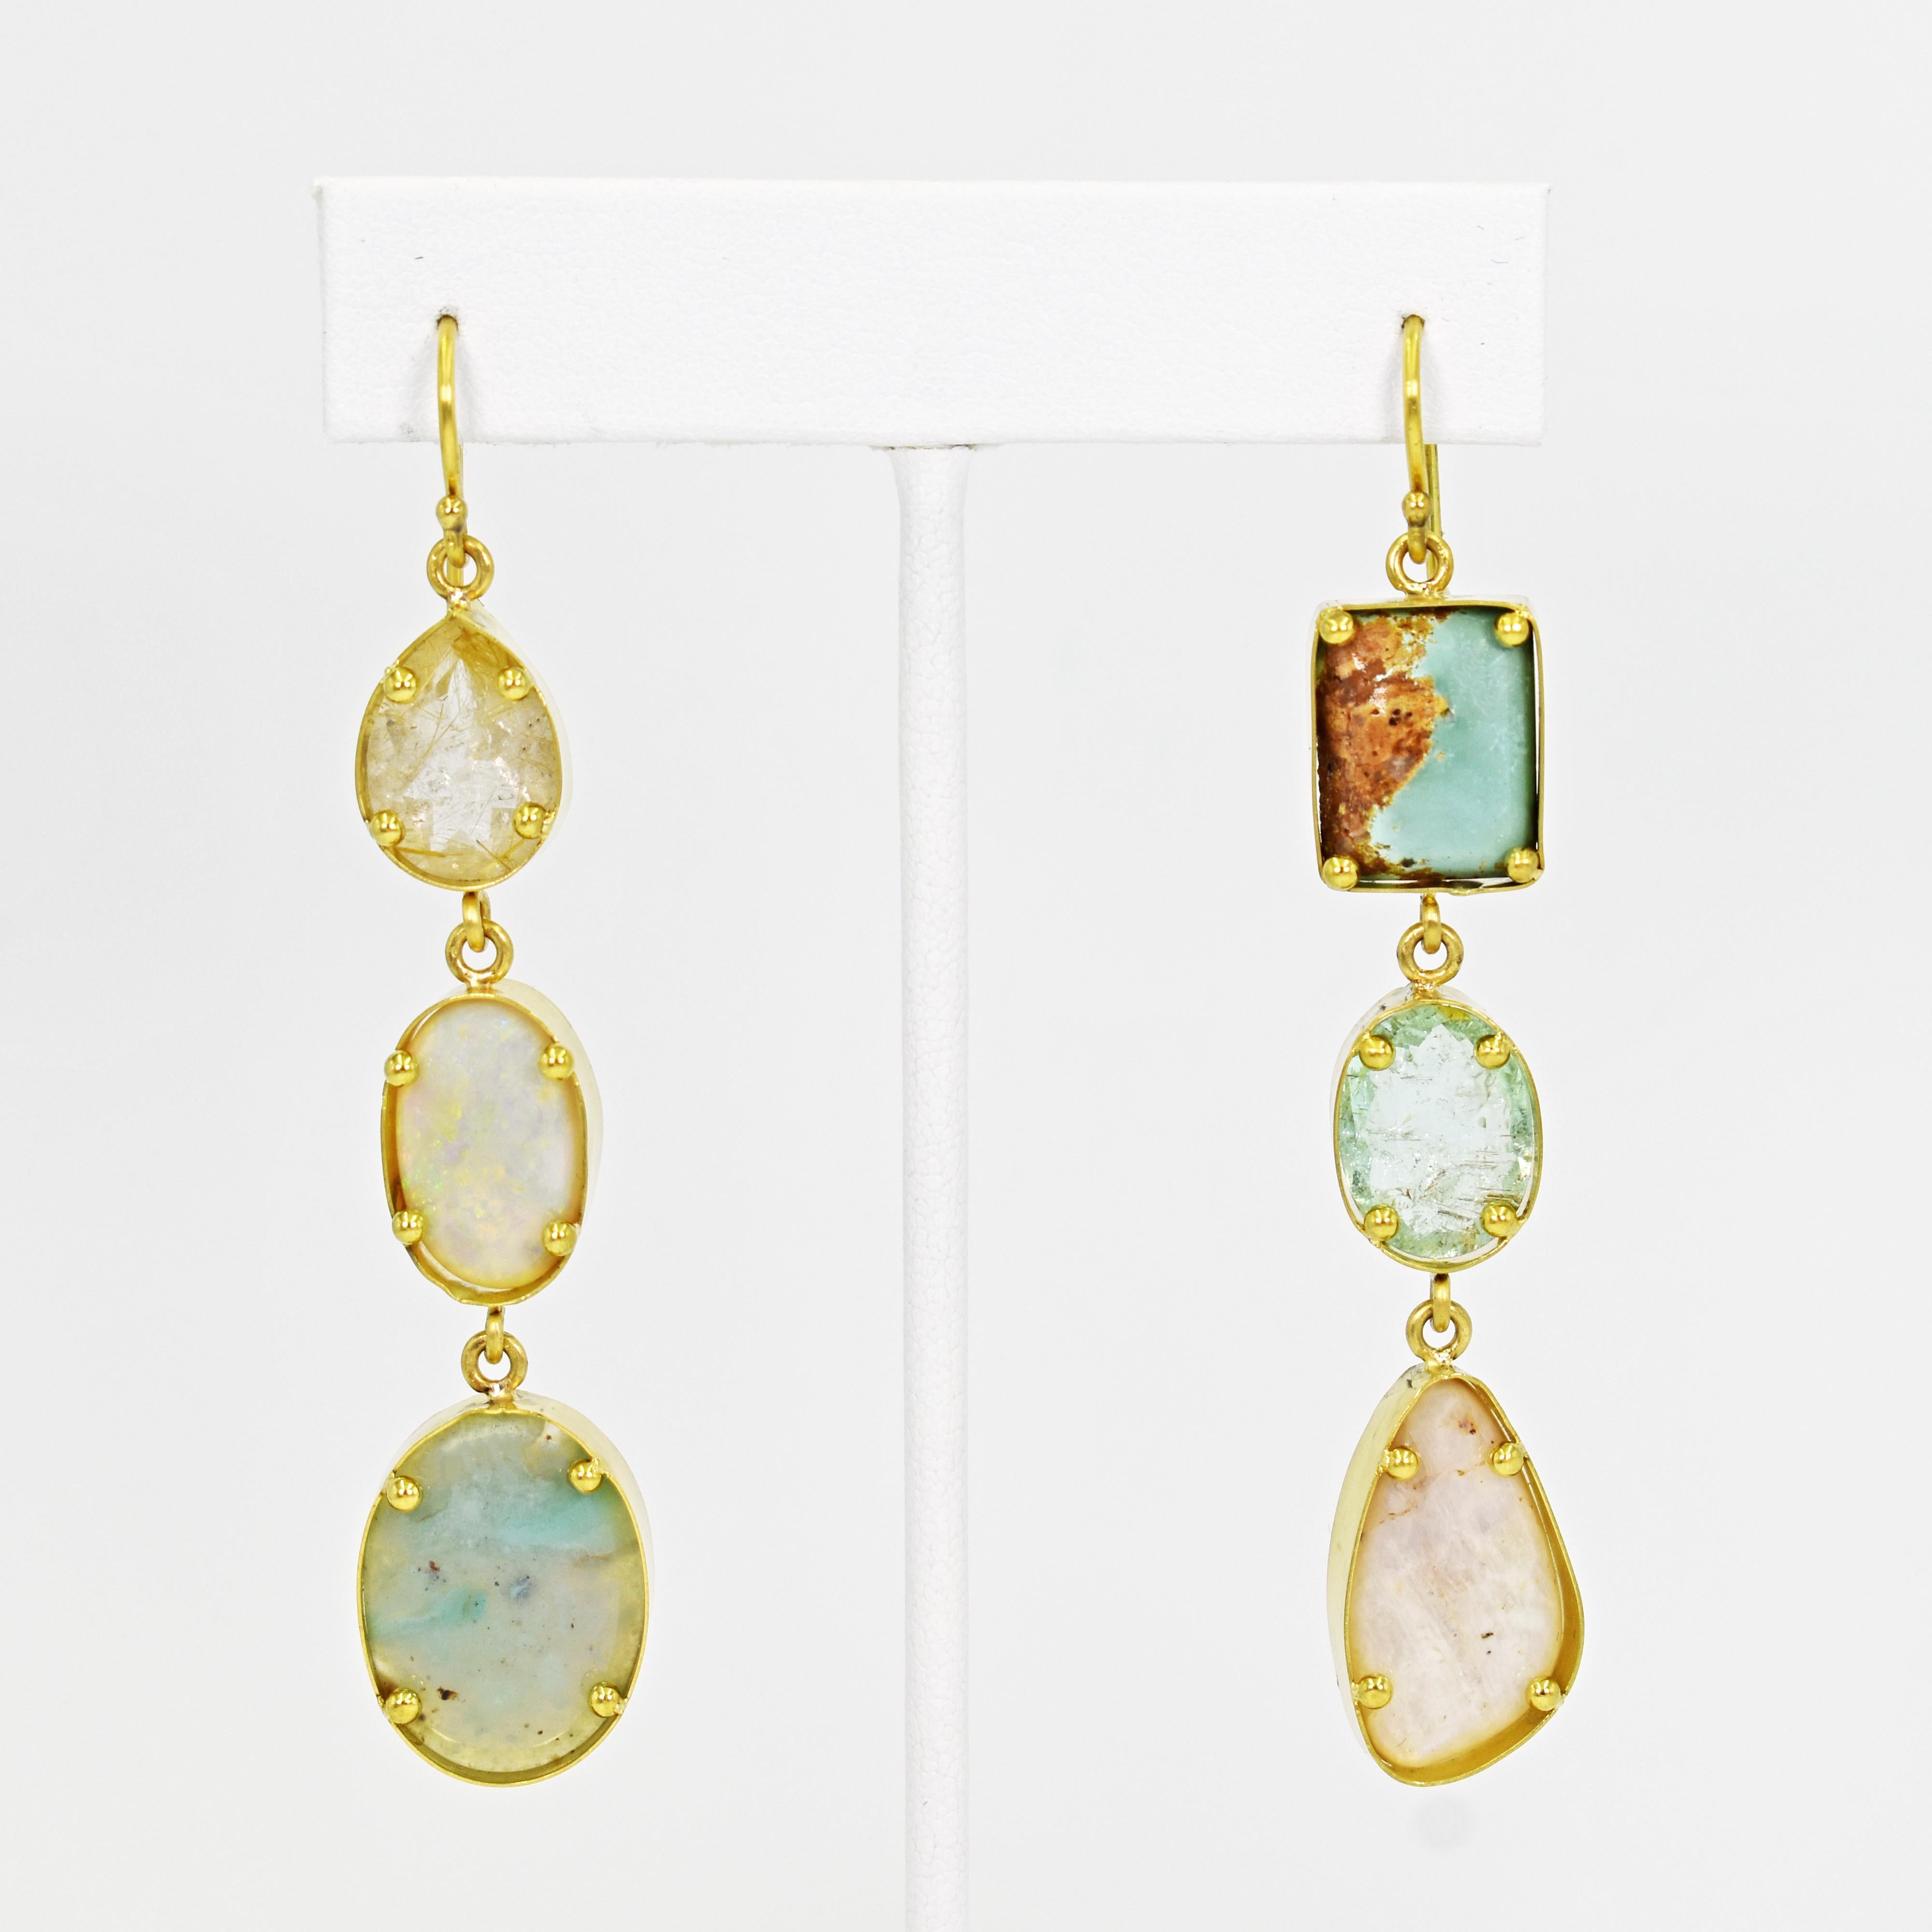 One-of-a-kind, handmade multi-gemstone 22k yellow gold asymmetrical dangle earrings featuring Rutilated Quartz, White Opal, Aquaprase, Turquoise, Aquamarine and Russian Moonstone. Dangle earrings are 3.07 inches in total length. Unique mix of